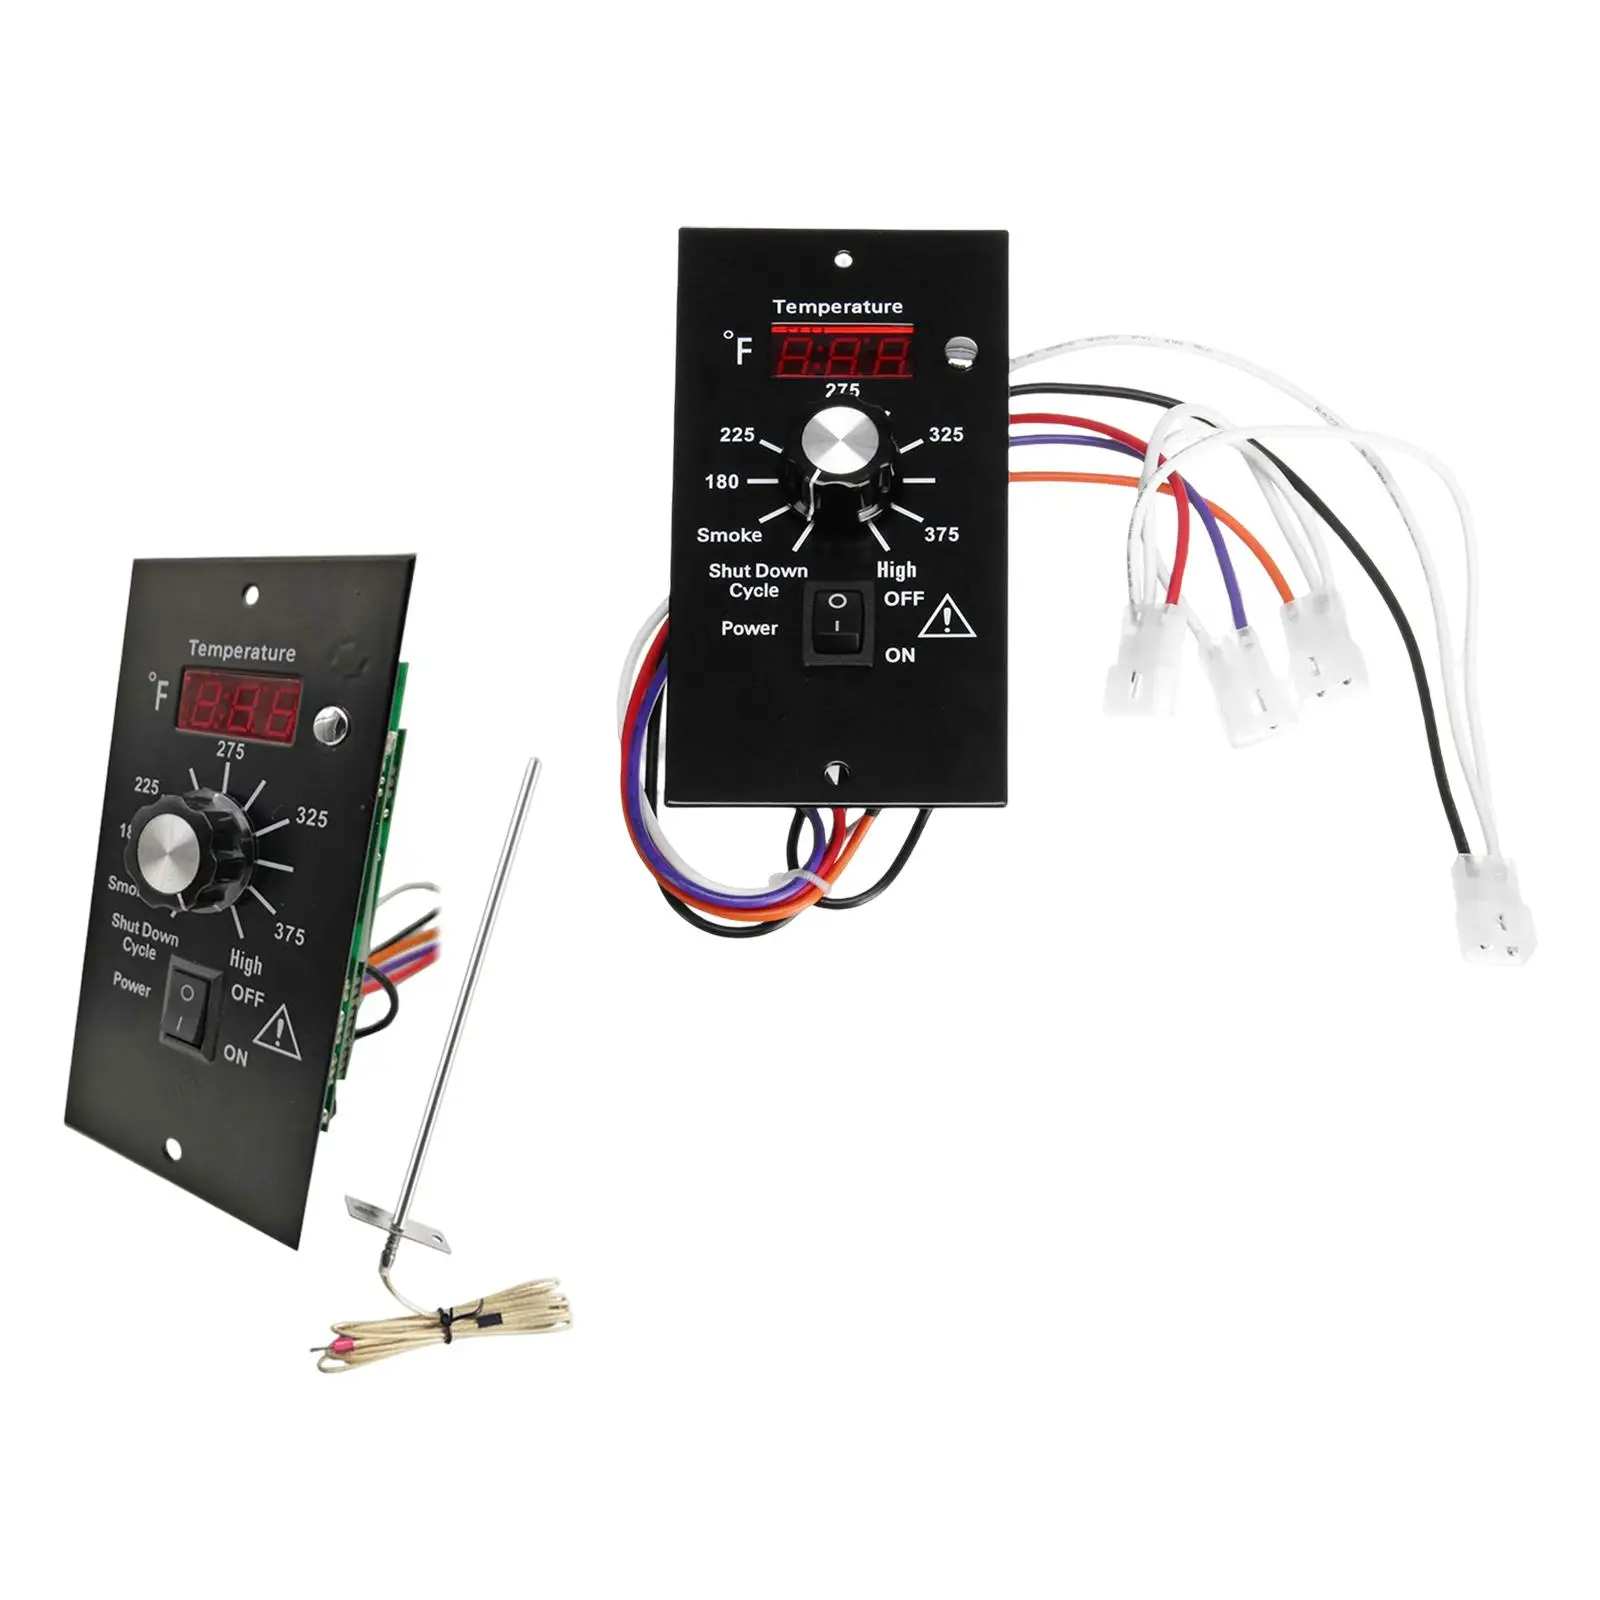 Digital Thermostat Control Panel Kit Temperature Controller for Kitchen Cooking BBQ